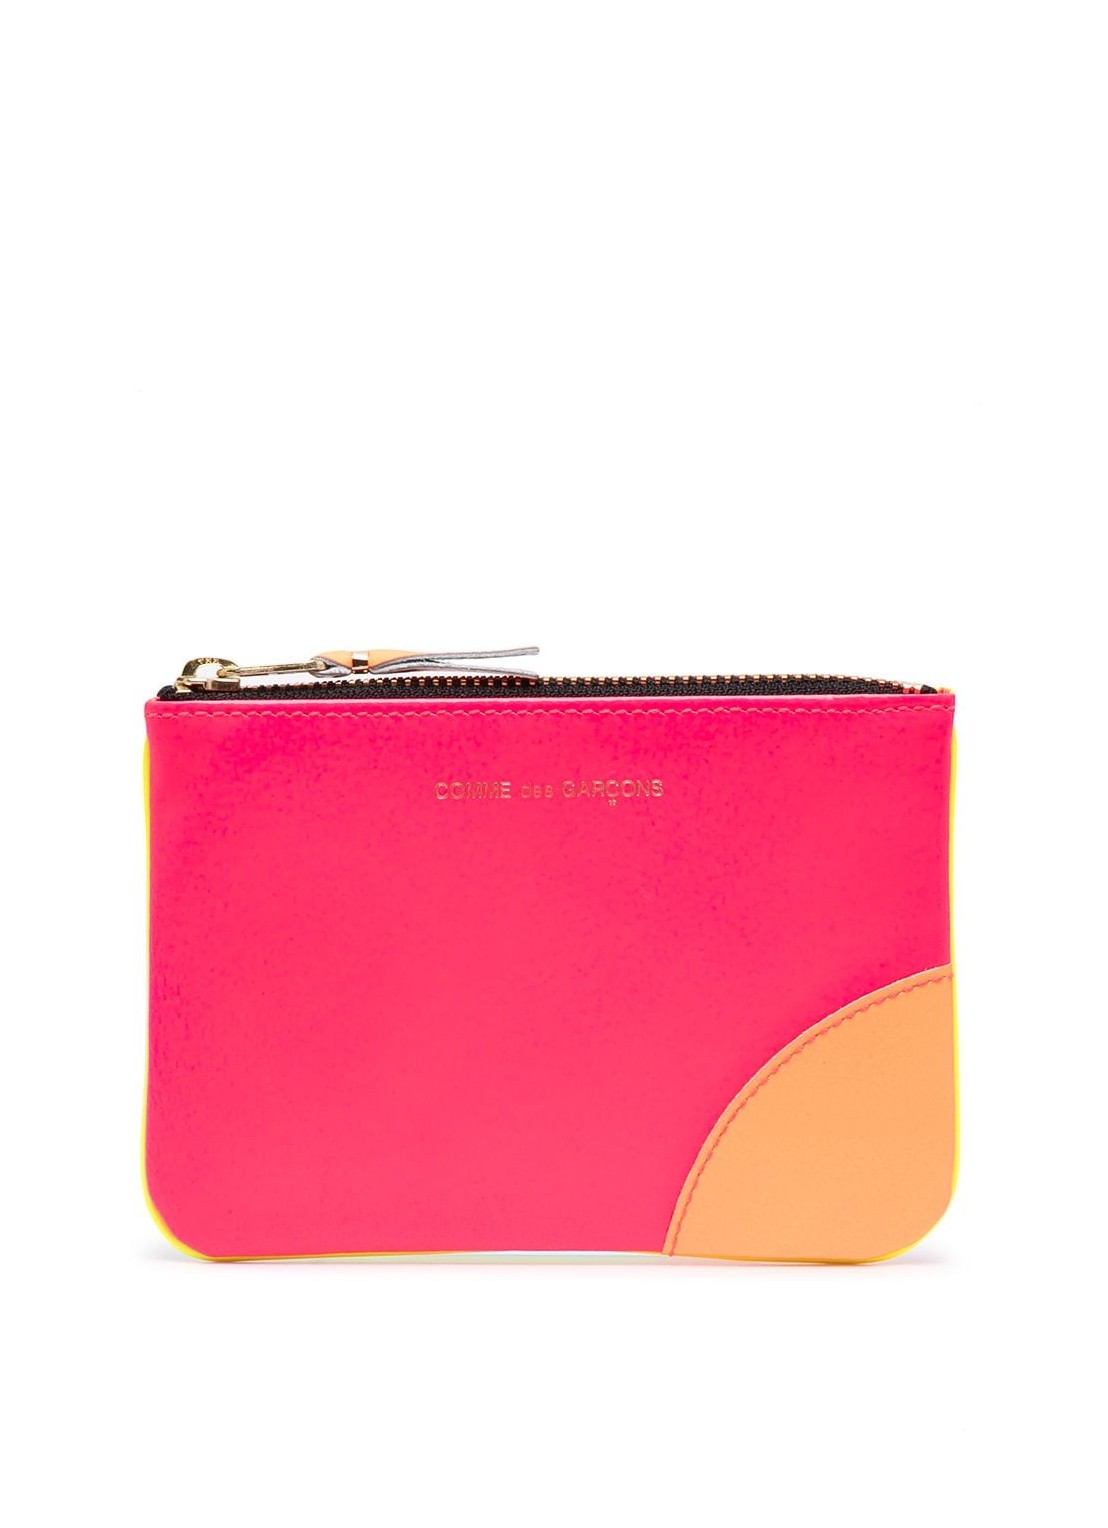 Cartera comme des garcons wallet man super fluo leather line sa8100sf pink yellow talla T/U
 